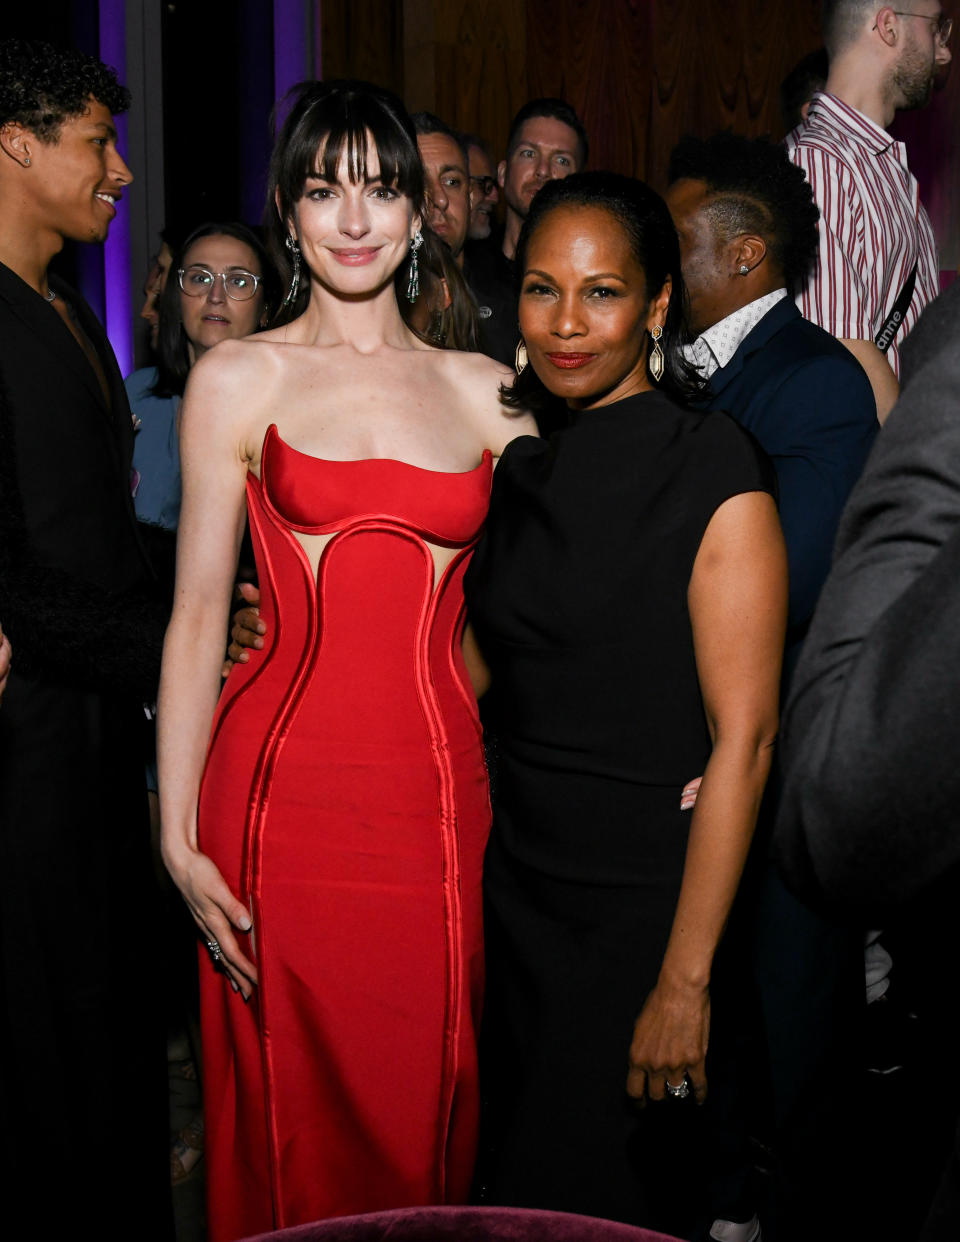 Anne Hathaway and Robinne Lee at the premiere of "The Idea of You" held at Jazz at Lincoln Center on April 29, 2024 in New York City.